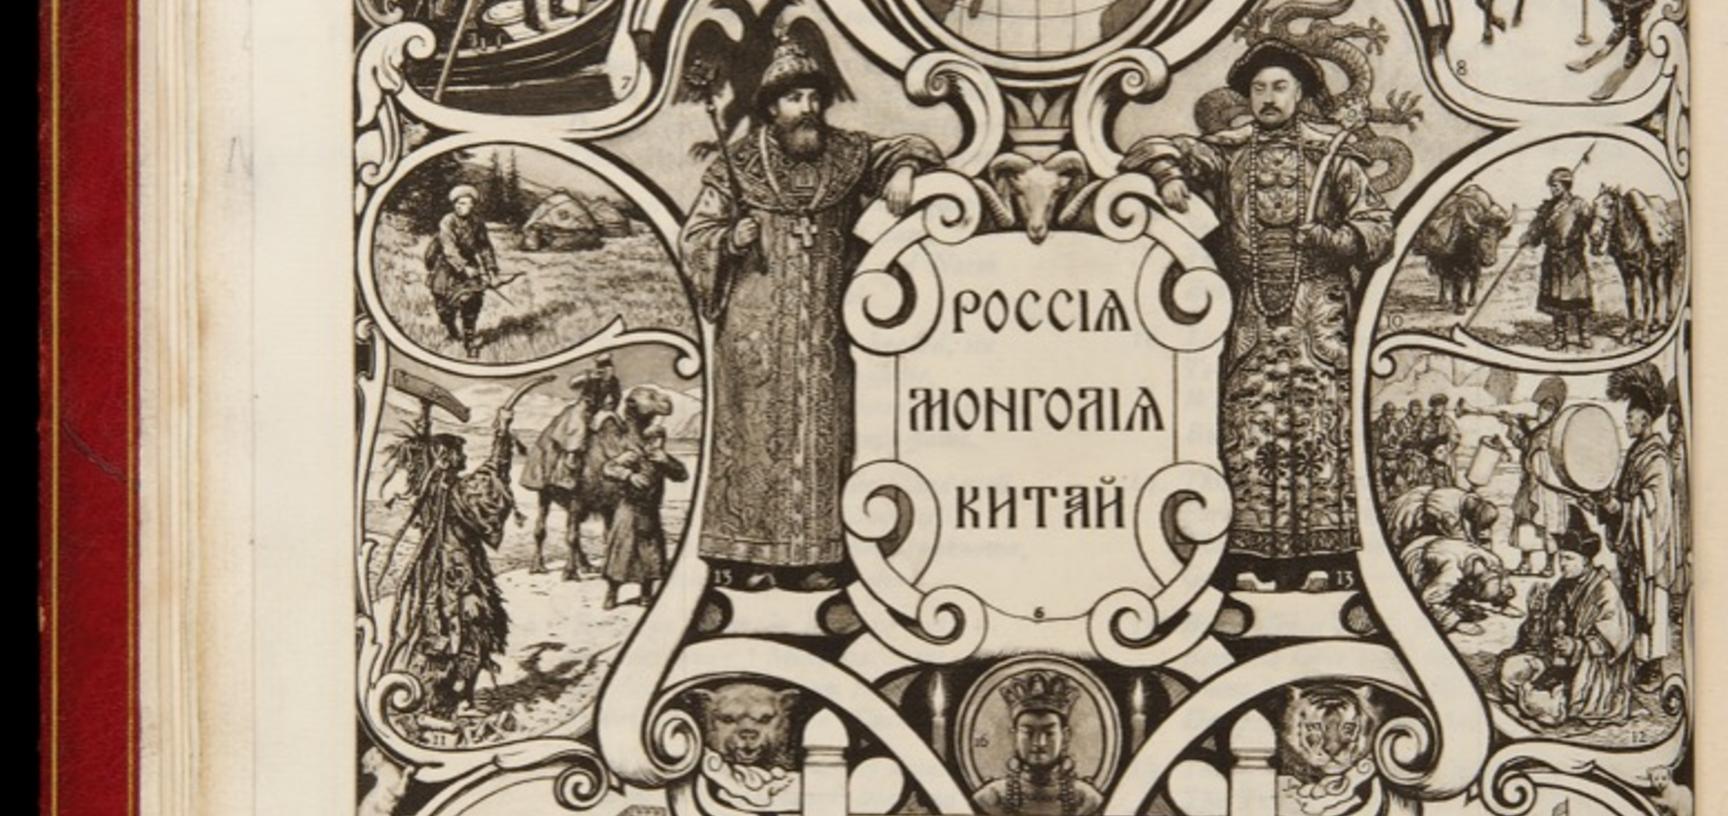 Frontispiece of John F. Baddeley’s Russia, Mongolia, China: Being Some Record of the Relations Between Them from the Beginning of the XVIIth Century to the Death of Tsar Alexei Mikhailovich, A.D. 1602–1676, etc., 2 vols. (London, 1919).